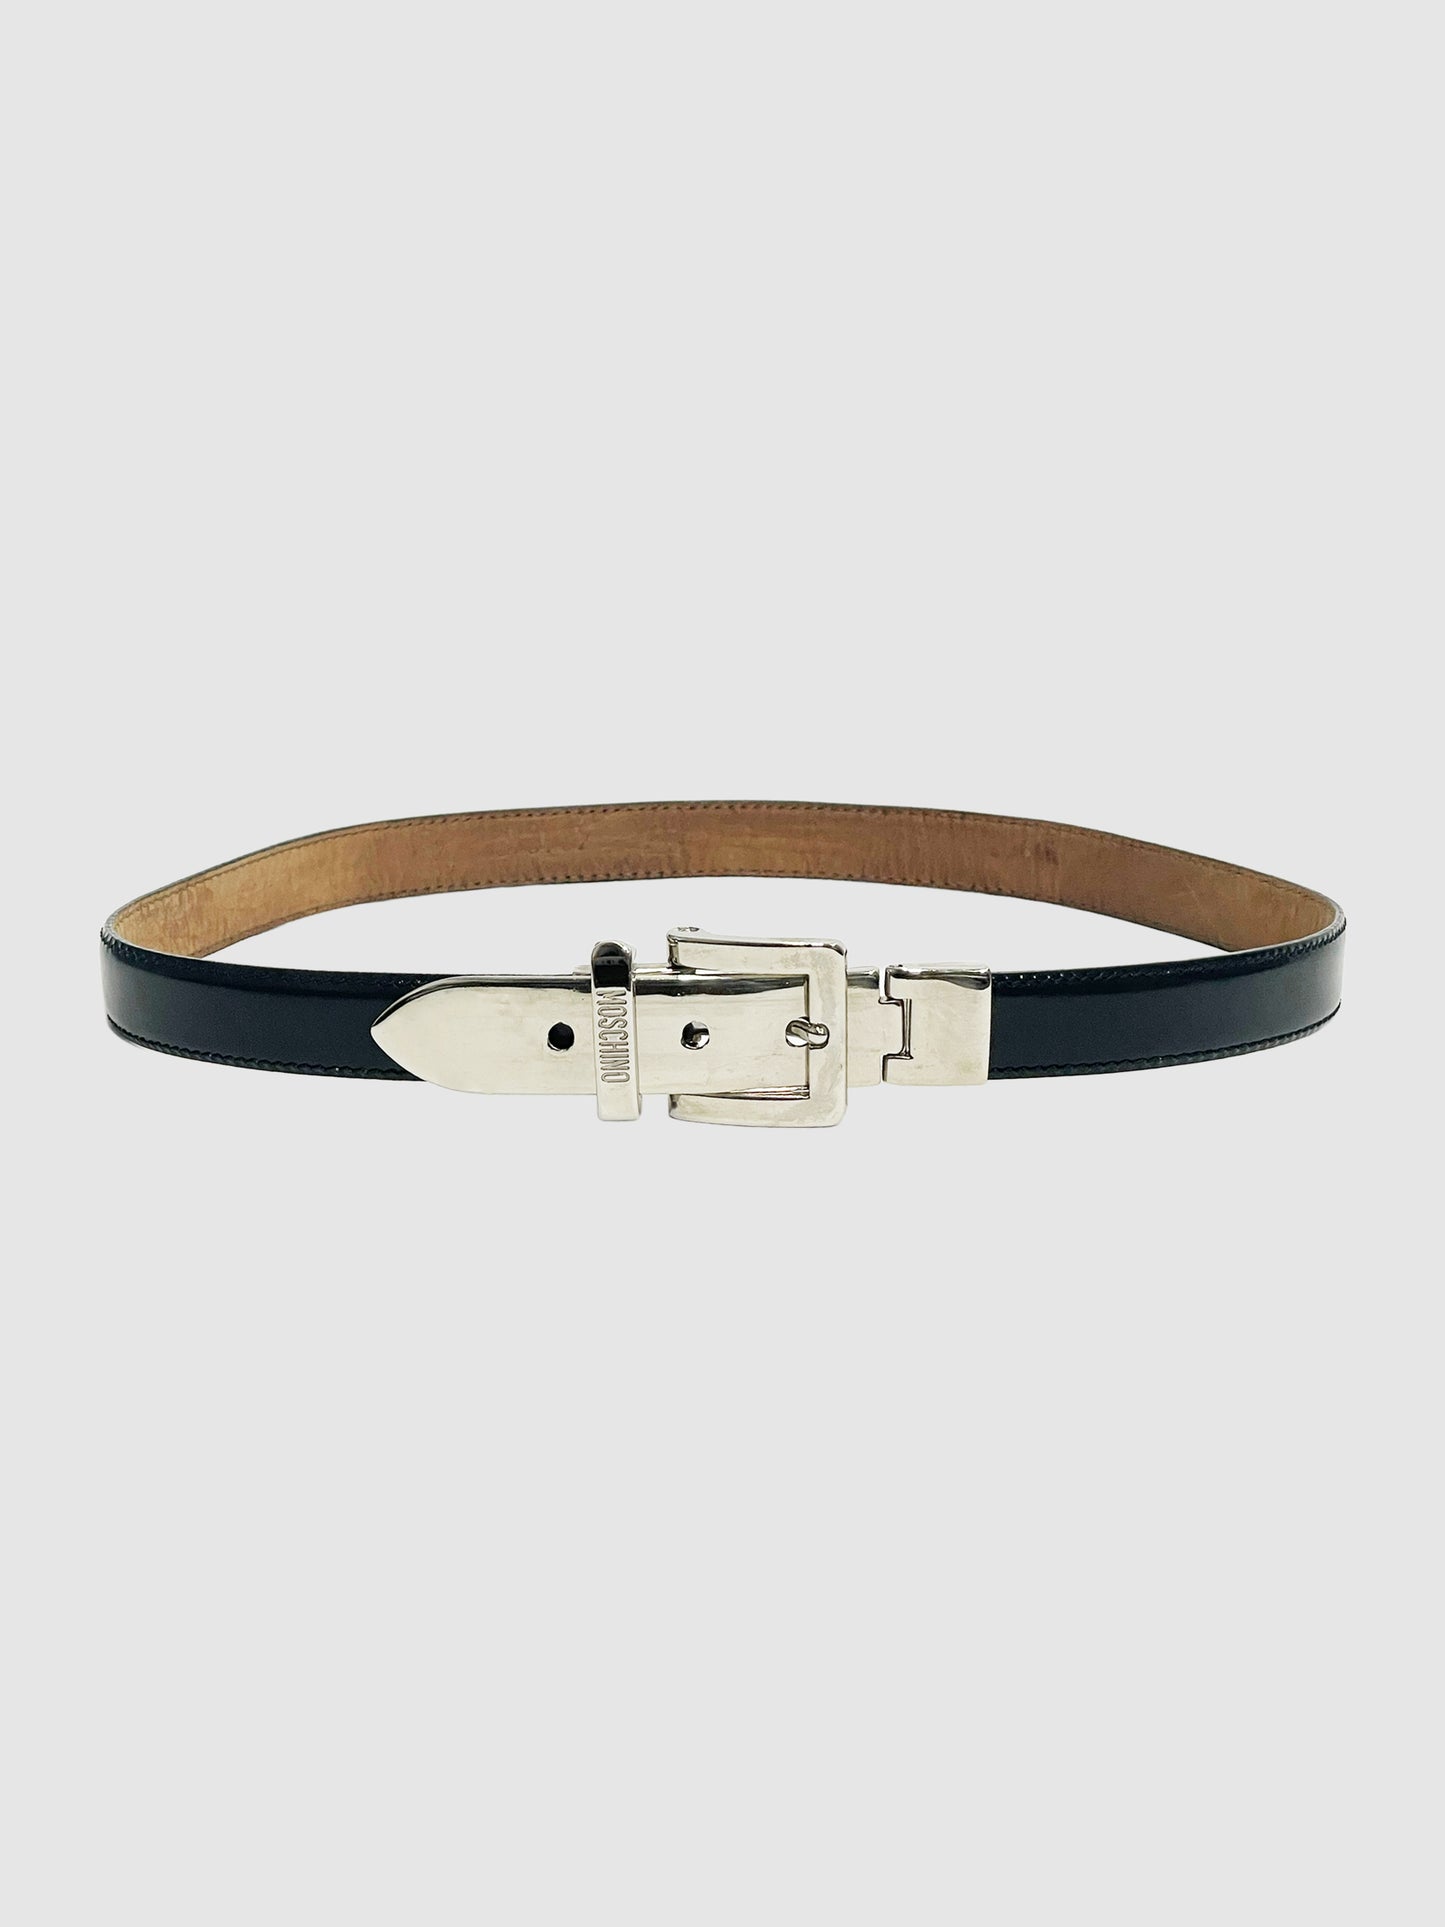 Moschino Narrow Belt with Silver-Tone Buckle